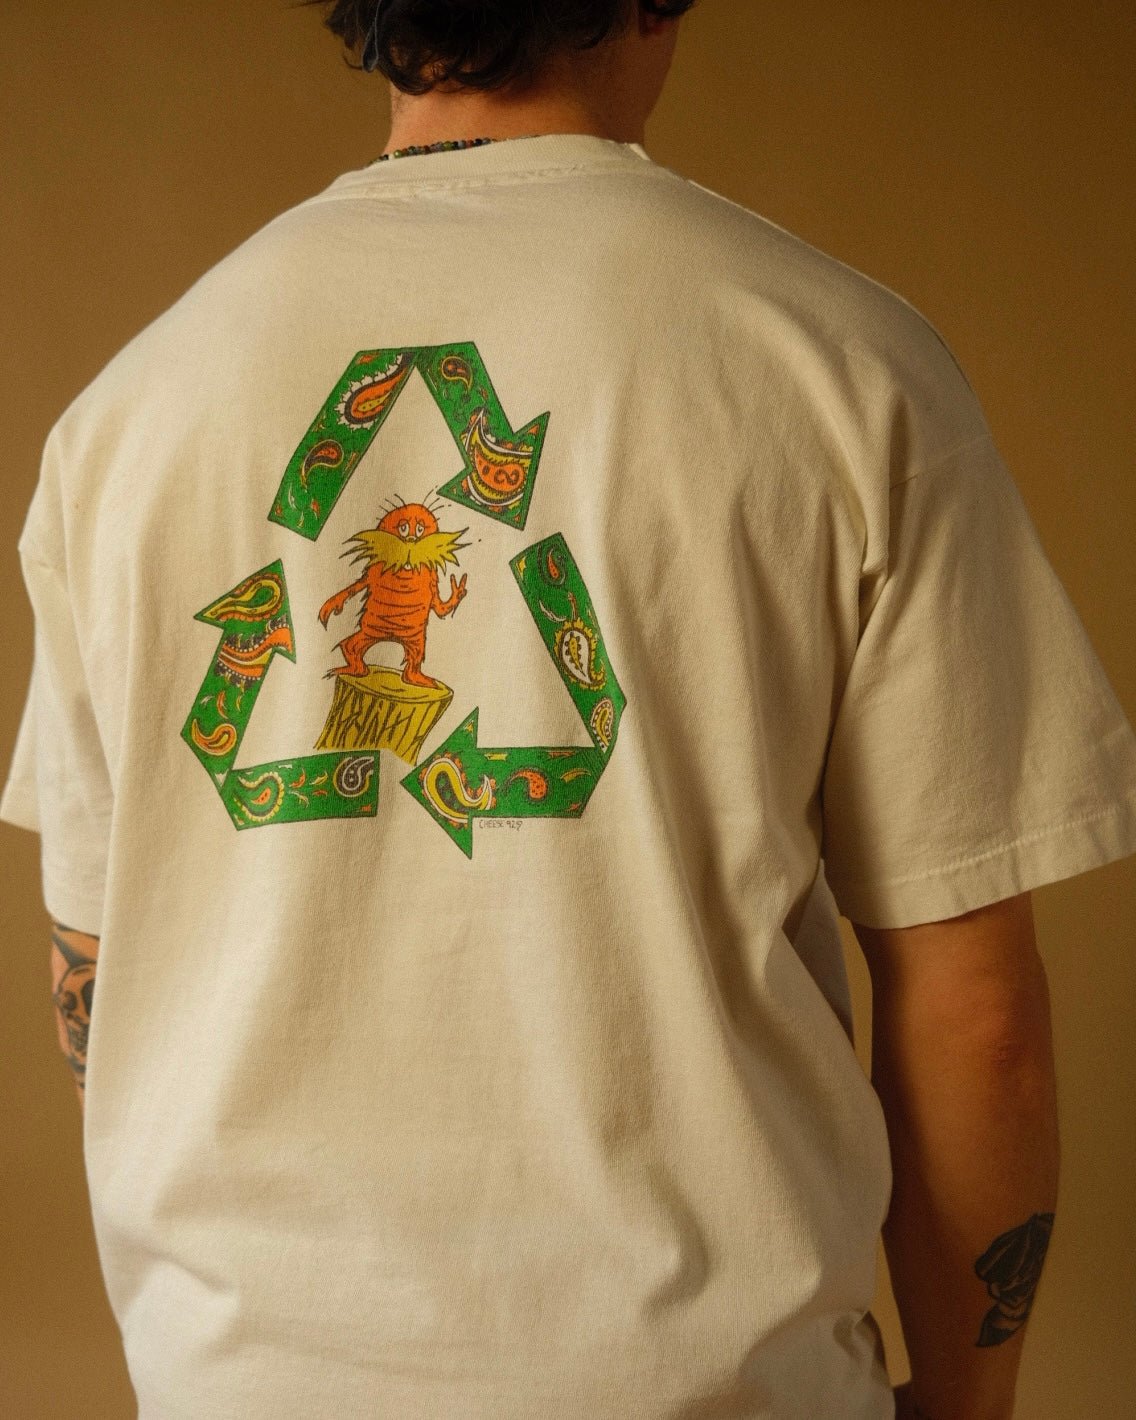 1992 The Lorax “I Speak For The Trees” Tee